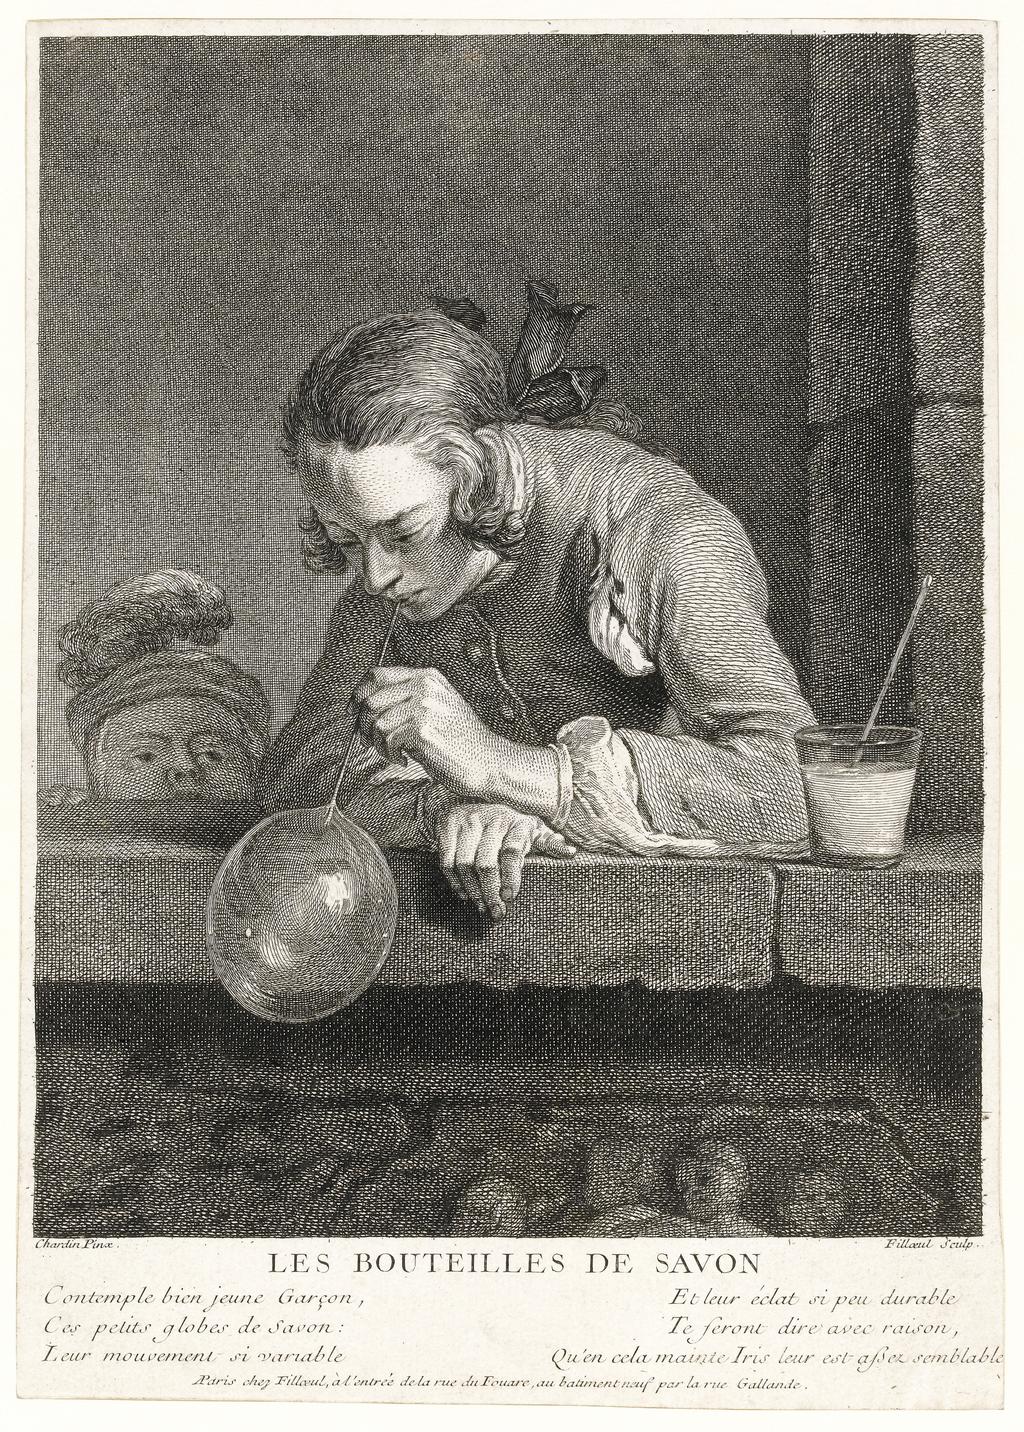 An image of Les Bouteilles de Savon. Pierre Filloeul, after Jean Baptiste Siméon Chardin. Etching and engraving on wove paper, height (paper) 27.3cm, width (paper) 19.4cm, advertised in the 'Mercure de France', December 1739.